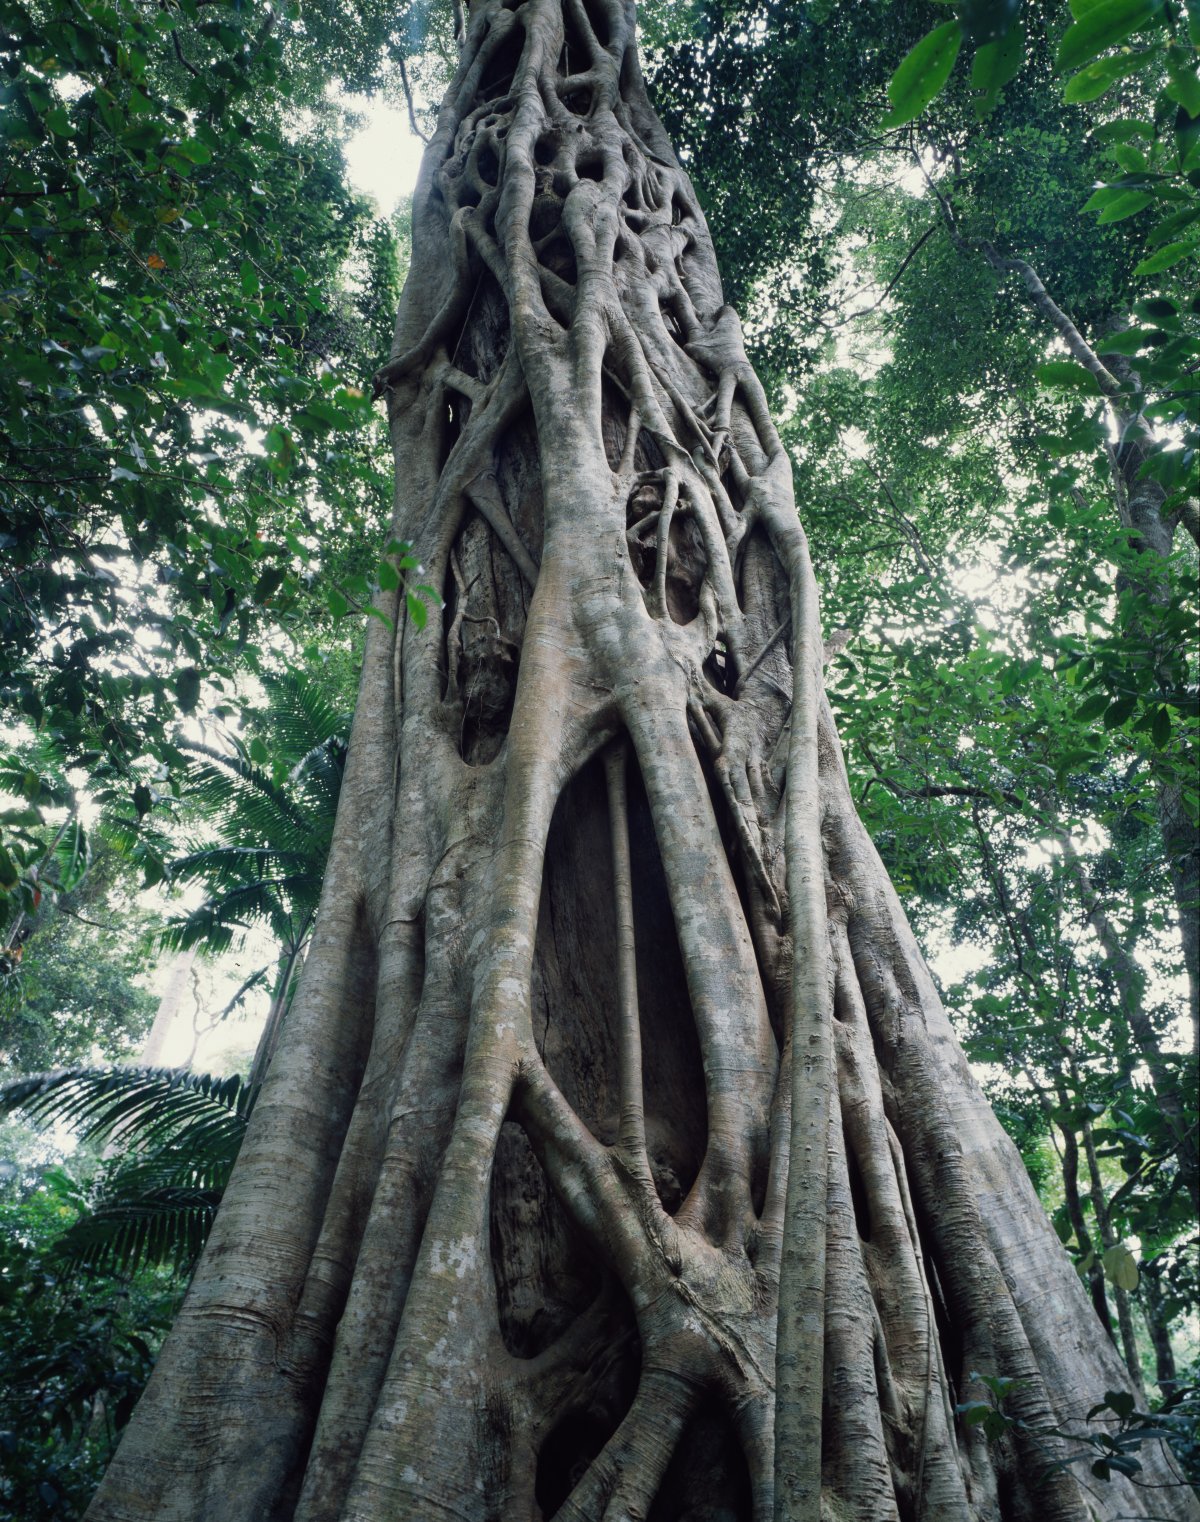 A large tree trunk is being strangled by fig roots. The trunk is almost completely covered.